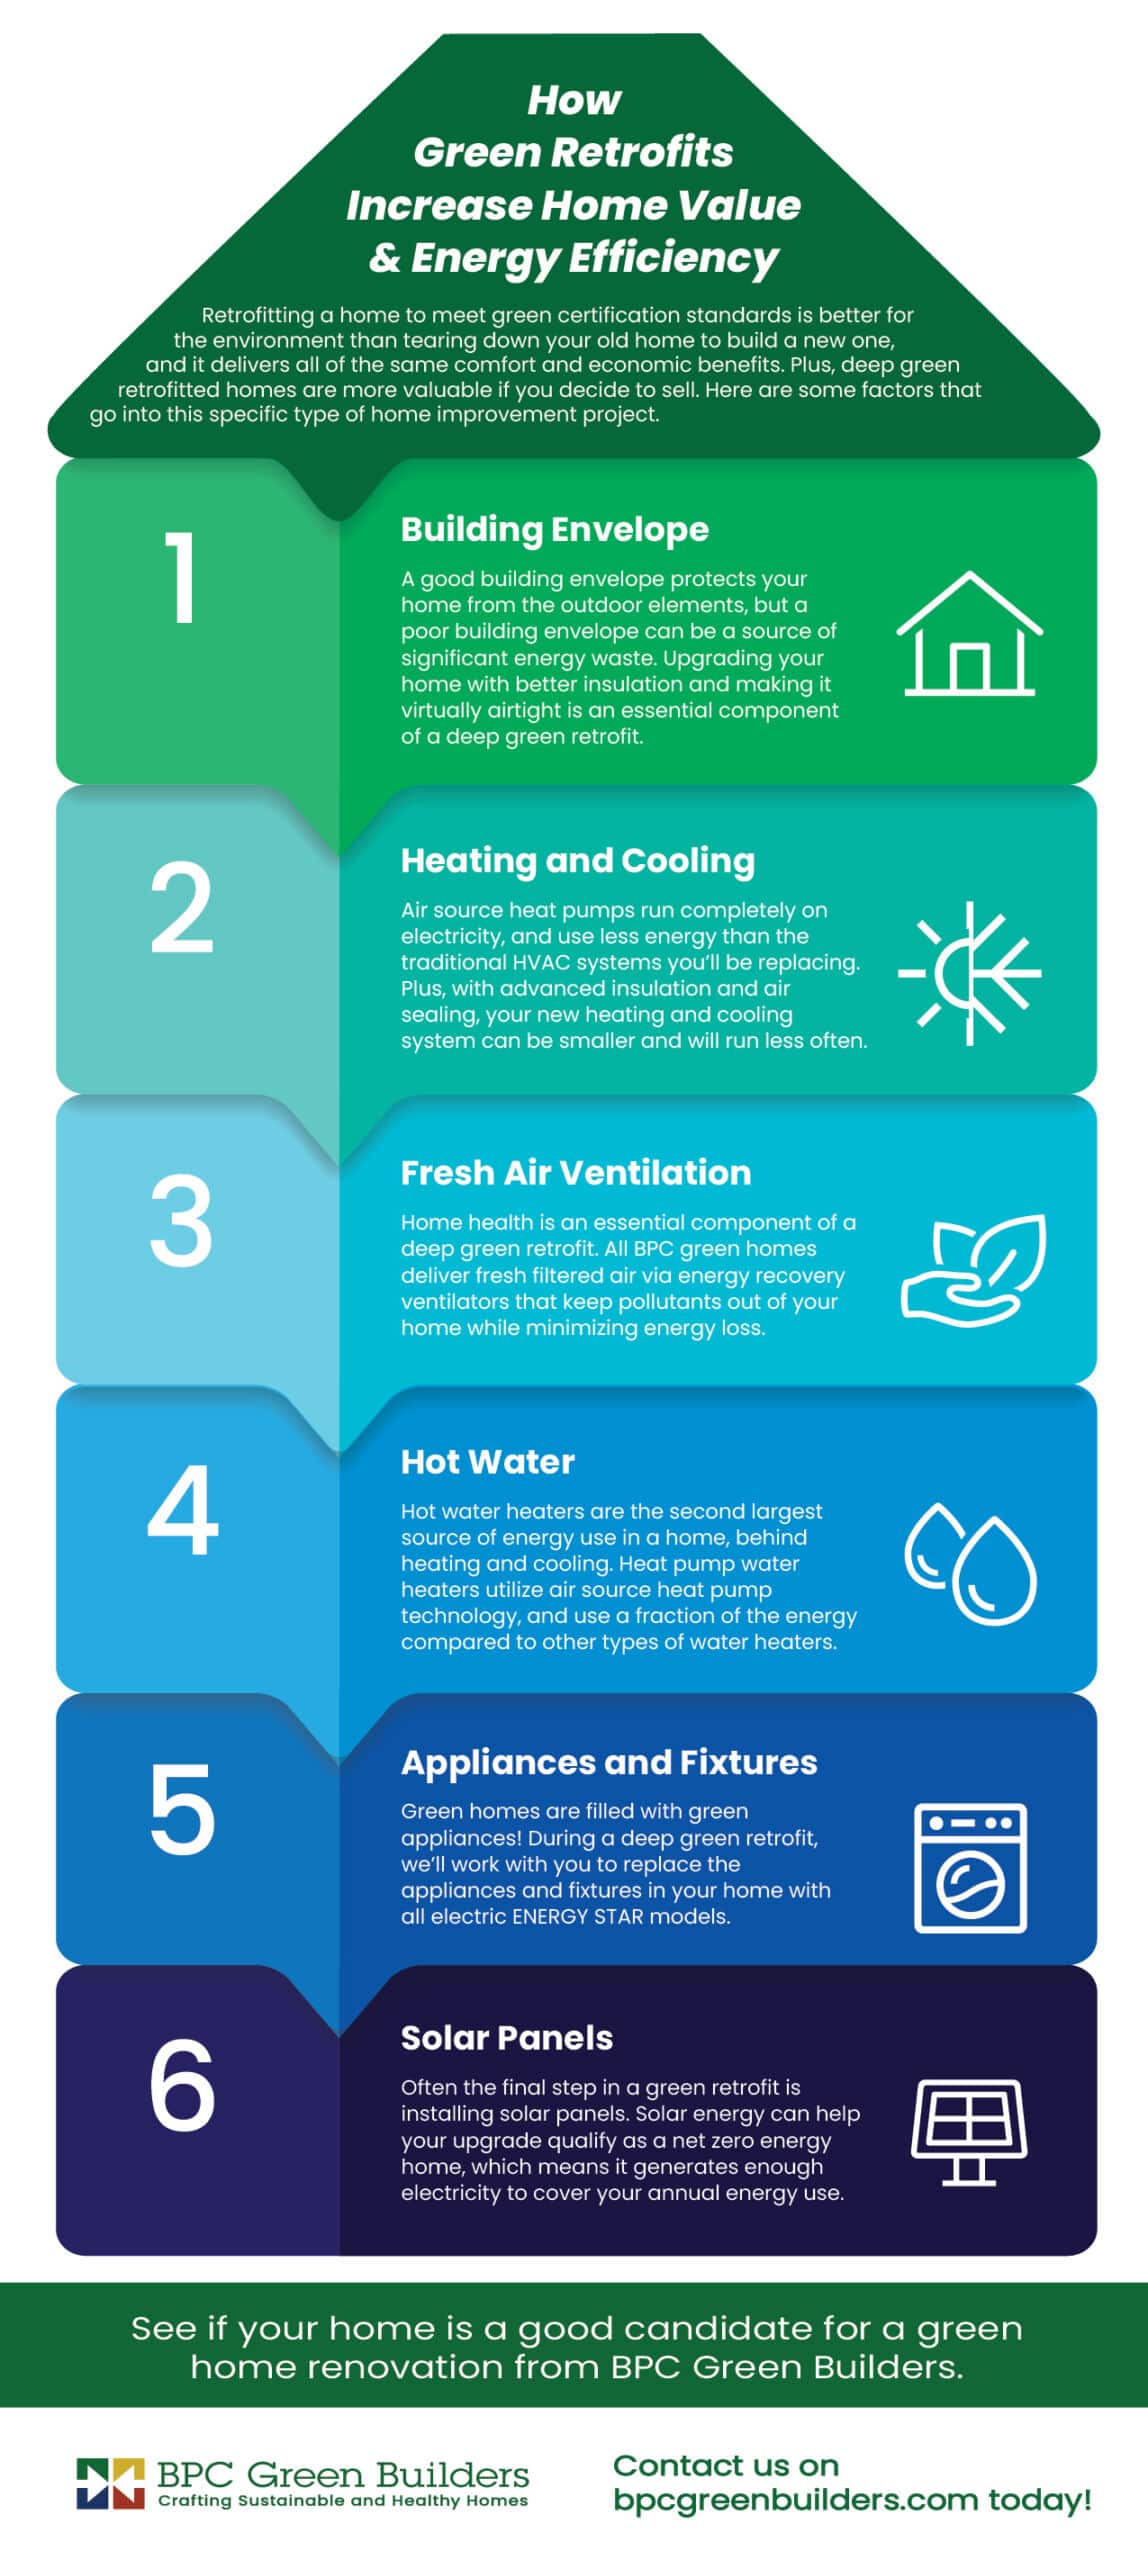 How Green Retrofits Increase Home Value and Energy Efficiency infographic 